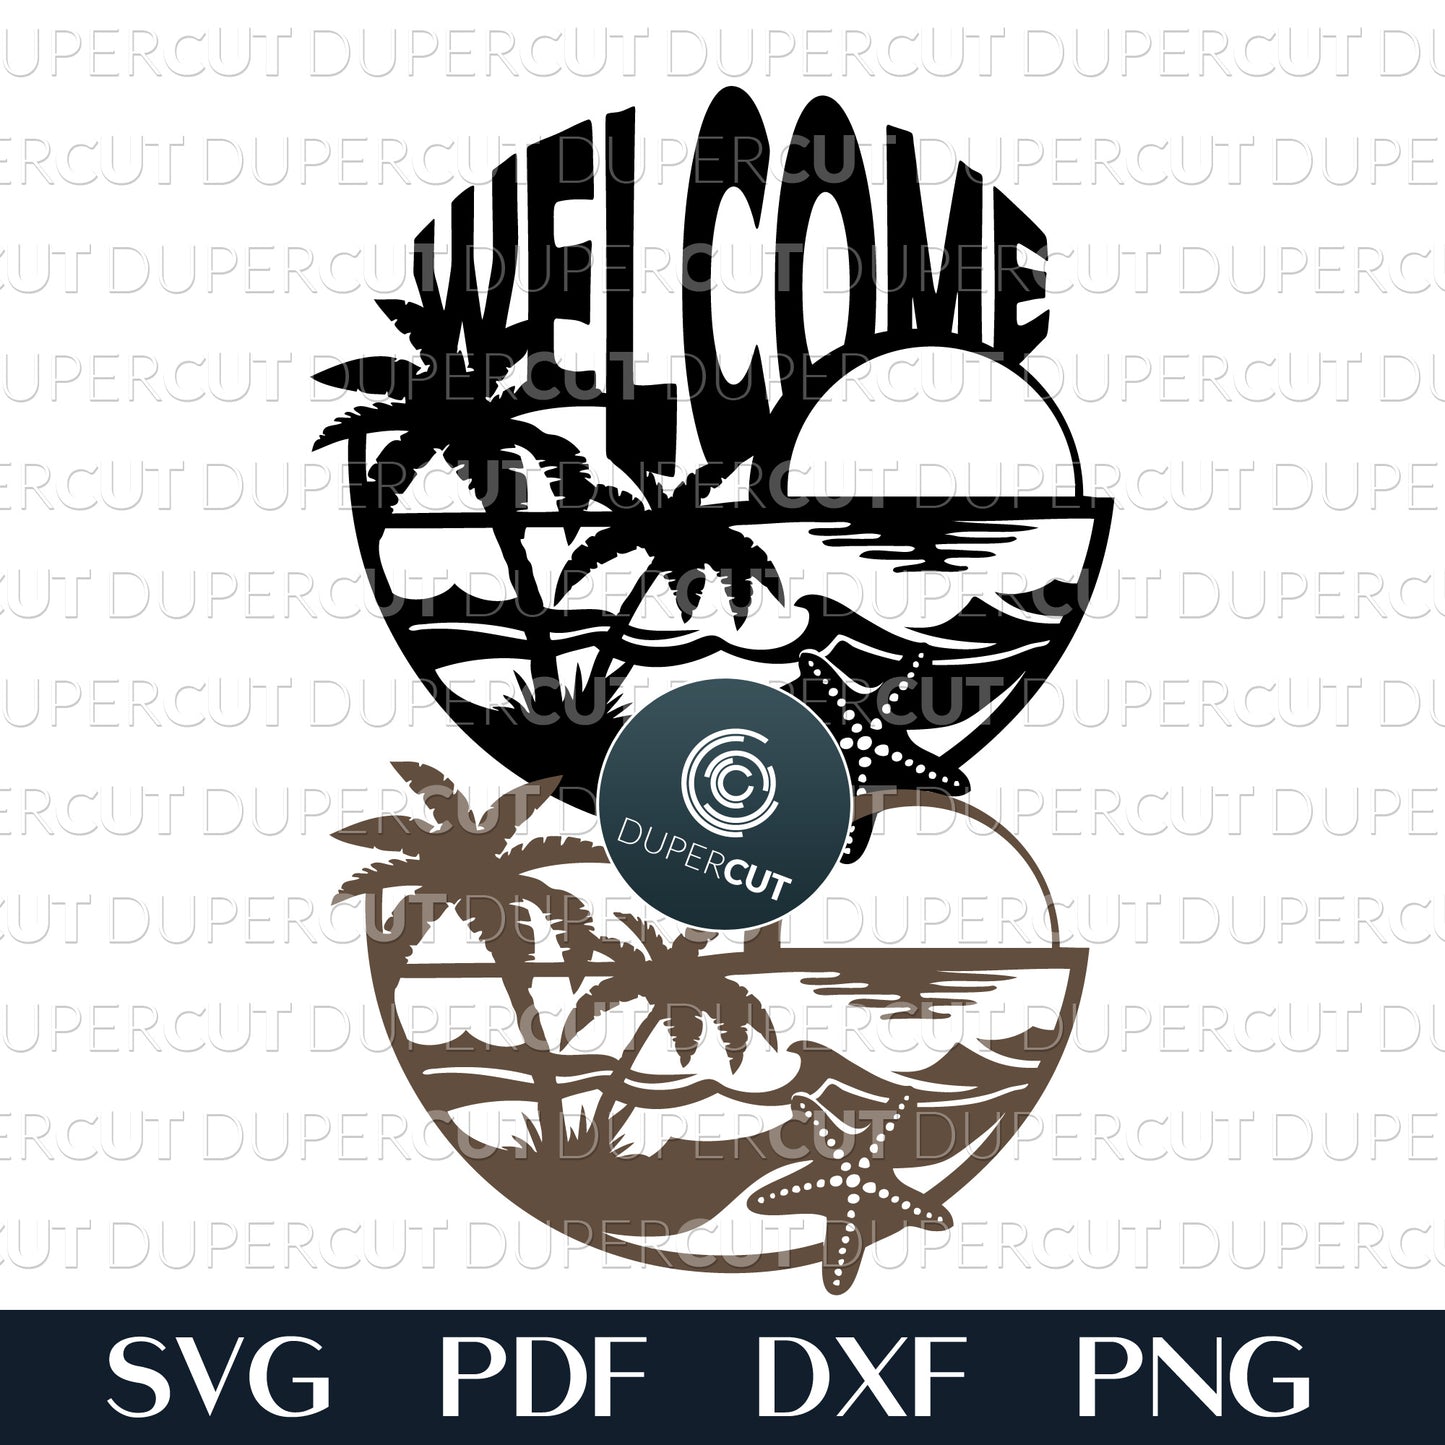 Beach welcome sign cabin decor - layered cutting files SVG PDF DXF template for laser cutting and engraving, Glowforge and CNC plasma machines